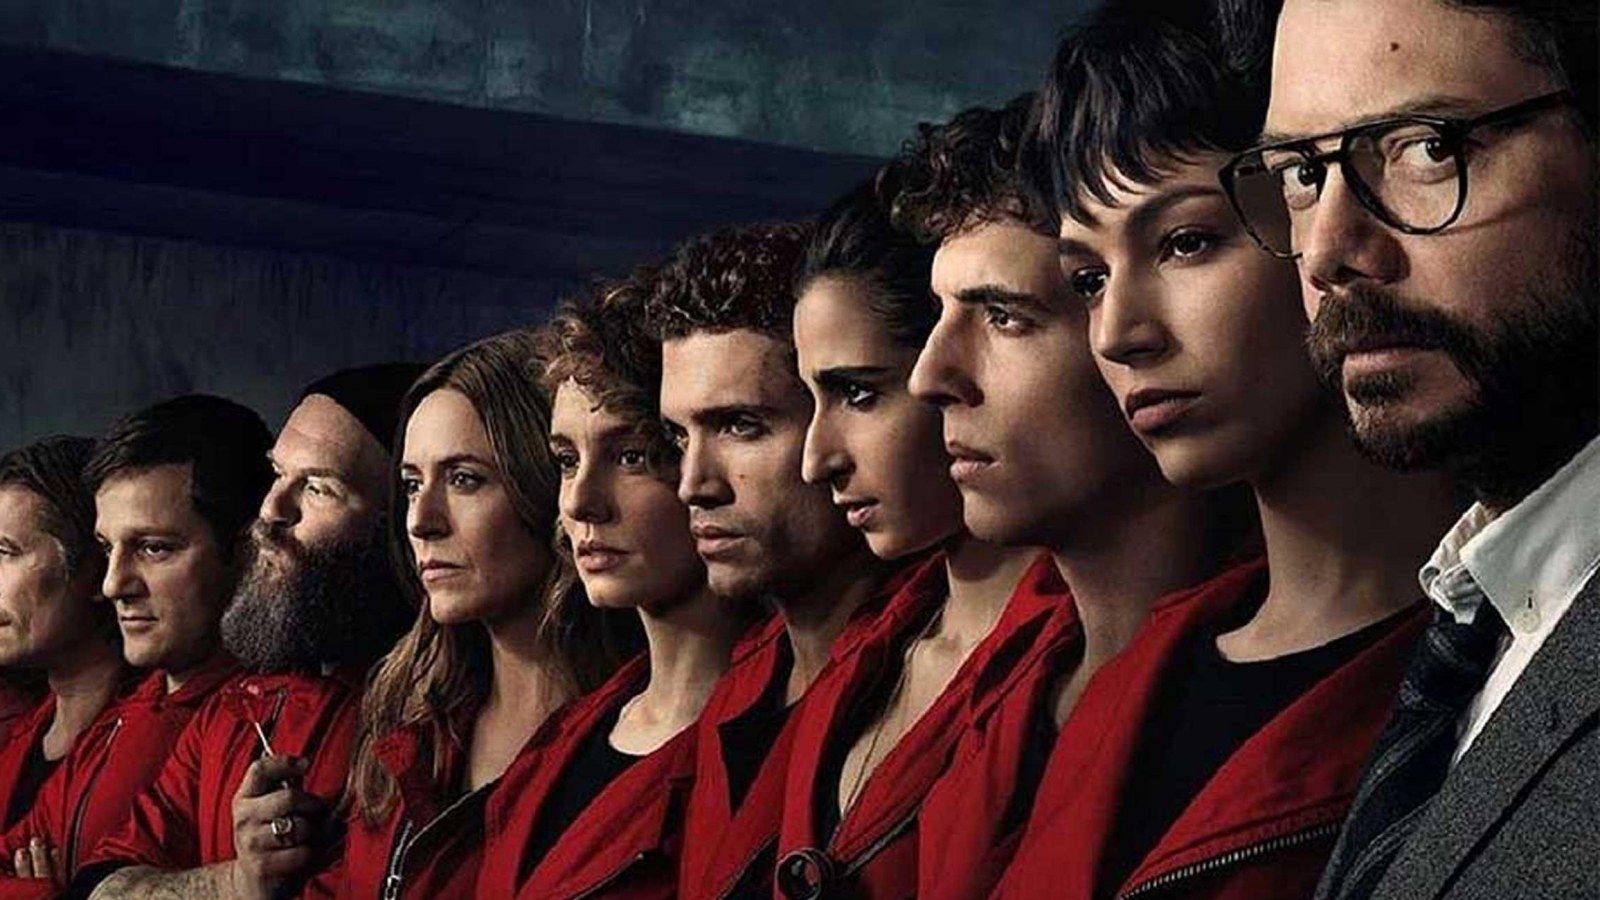 Money Heist' Part 5 Release Date: Why Fans Should Expect a Big Delay Before the Next Season